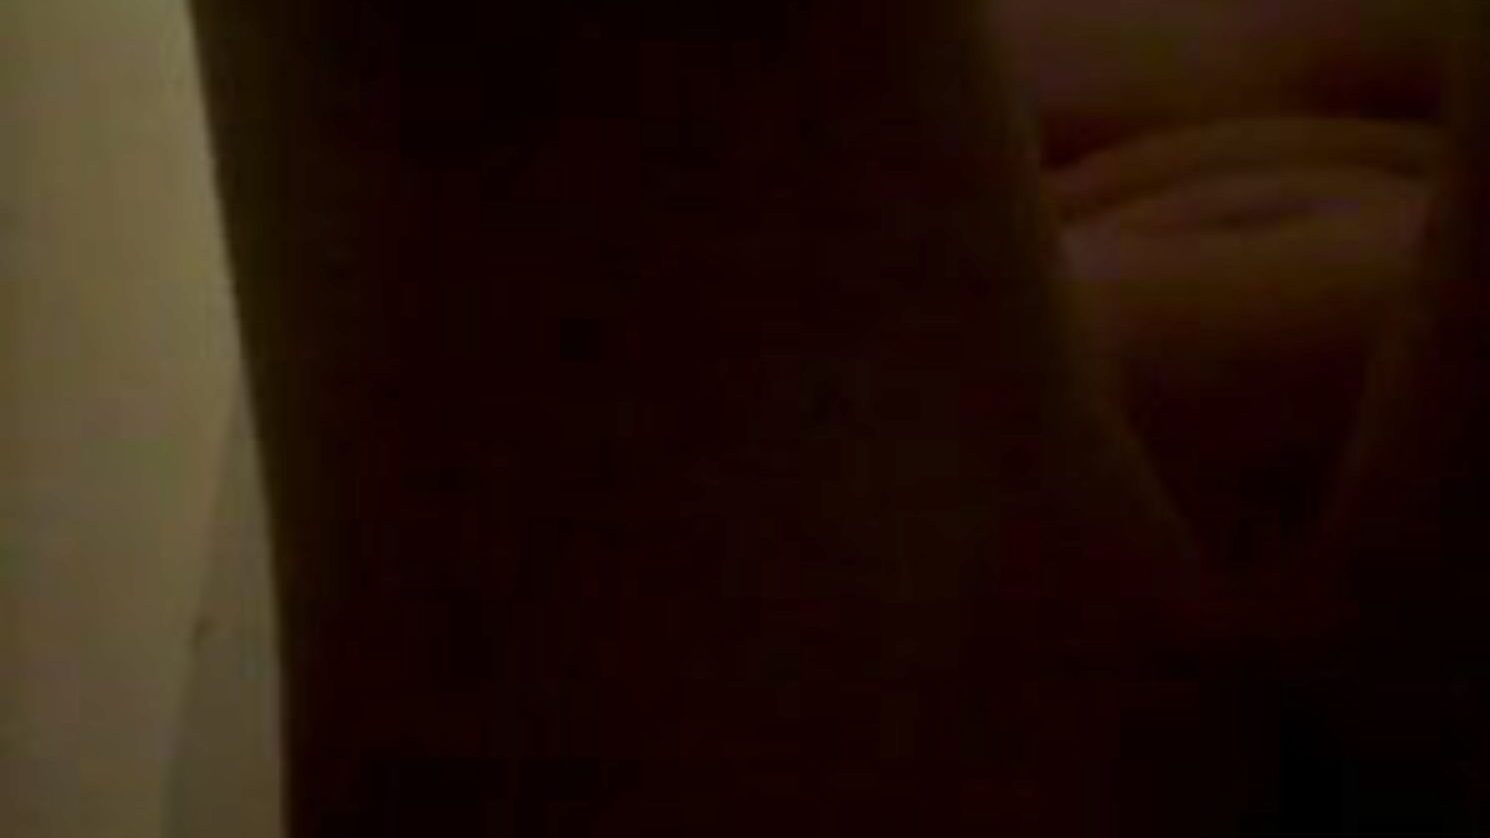 Piss Et Frotte Sur Le Corps, Free Pee Porn 45: xHamster Watch Piss Et Frotte Sur Le Corps clip on xHamster, the fattest orgy tube website with tons of free-for-all Pee Pissing & Homemade porno movie scenes